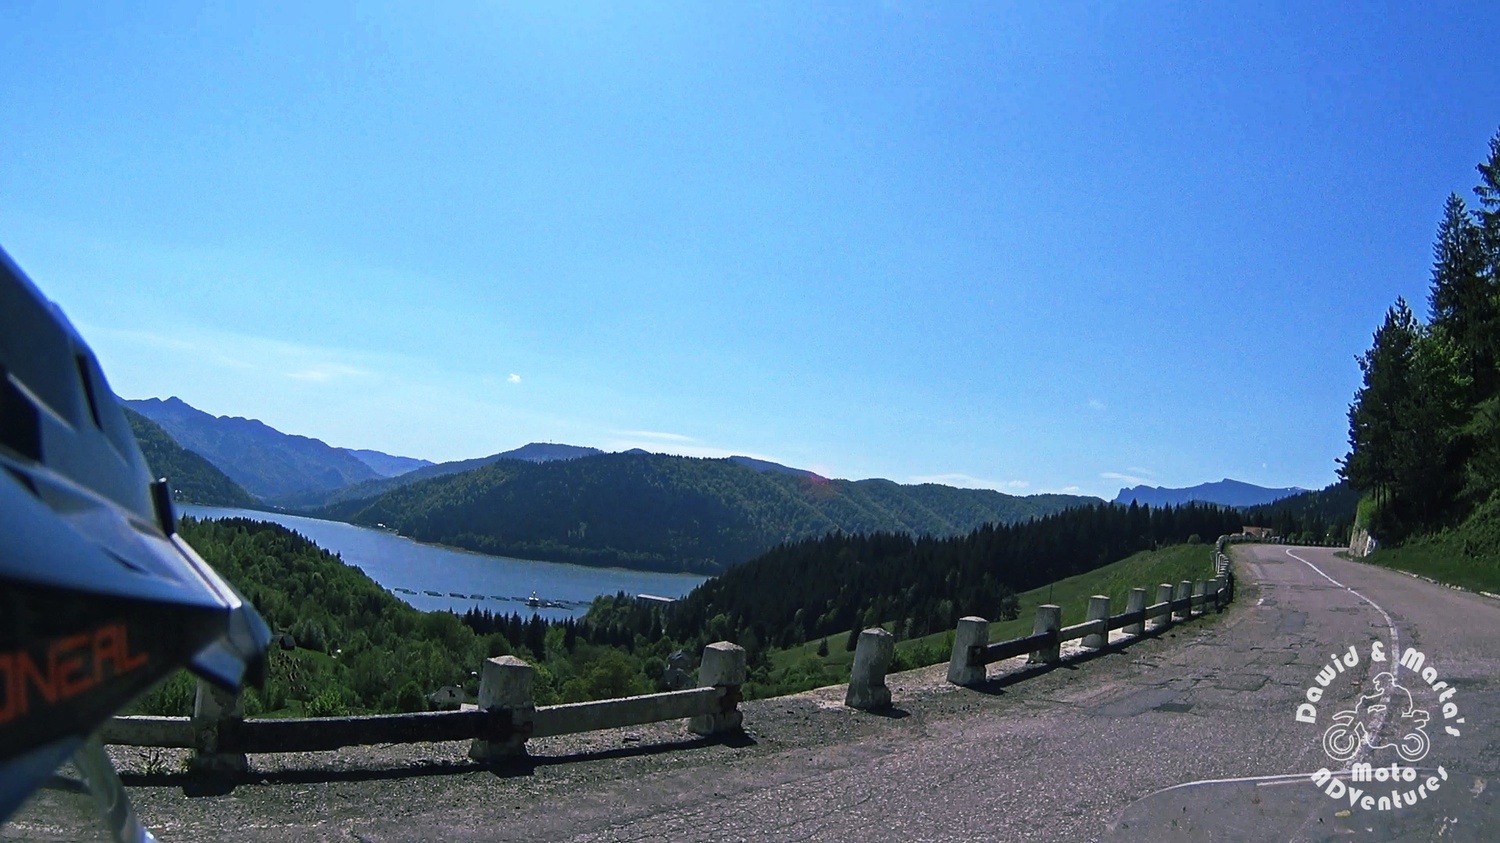 View on the Bicaz Lake from the road